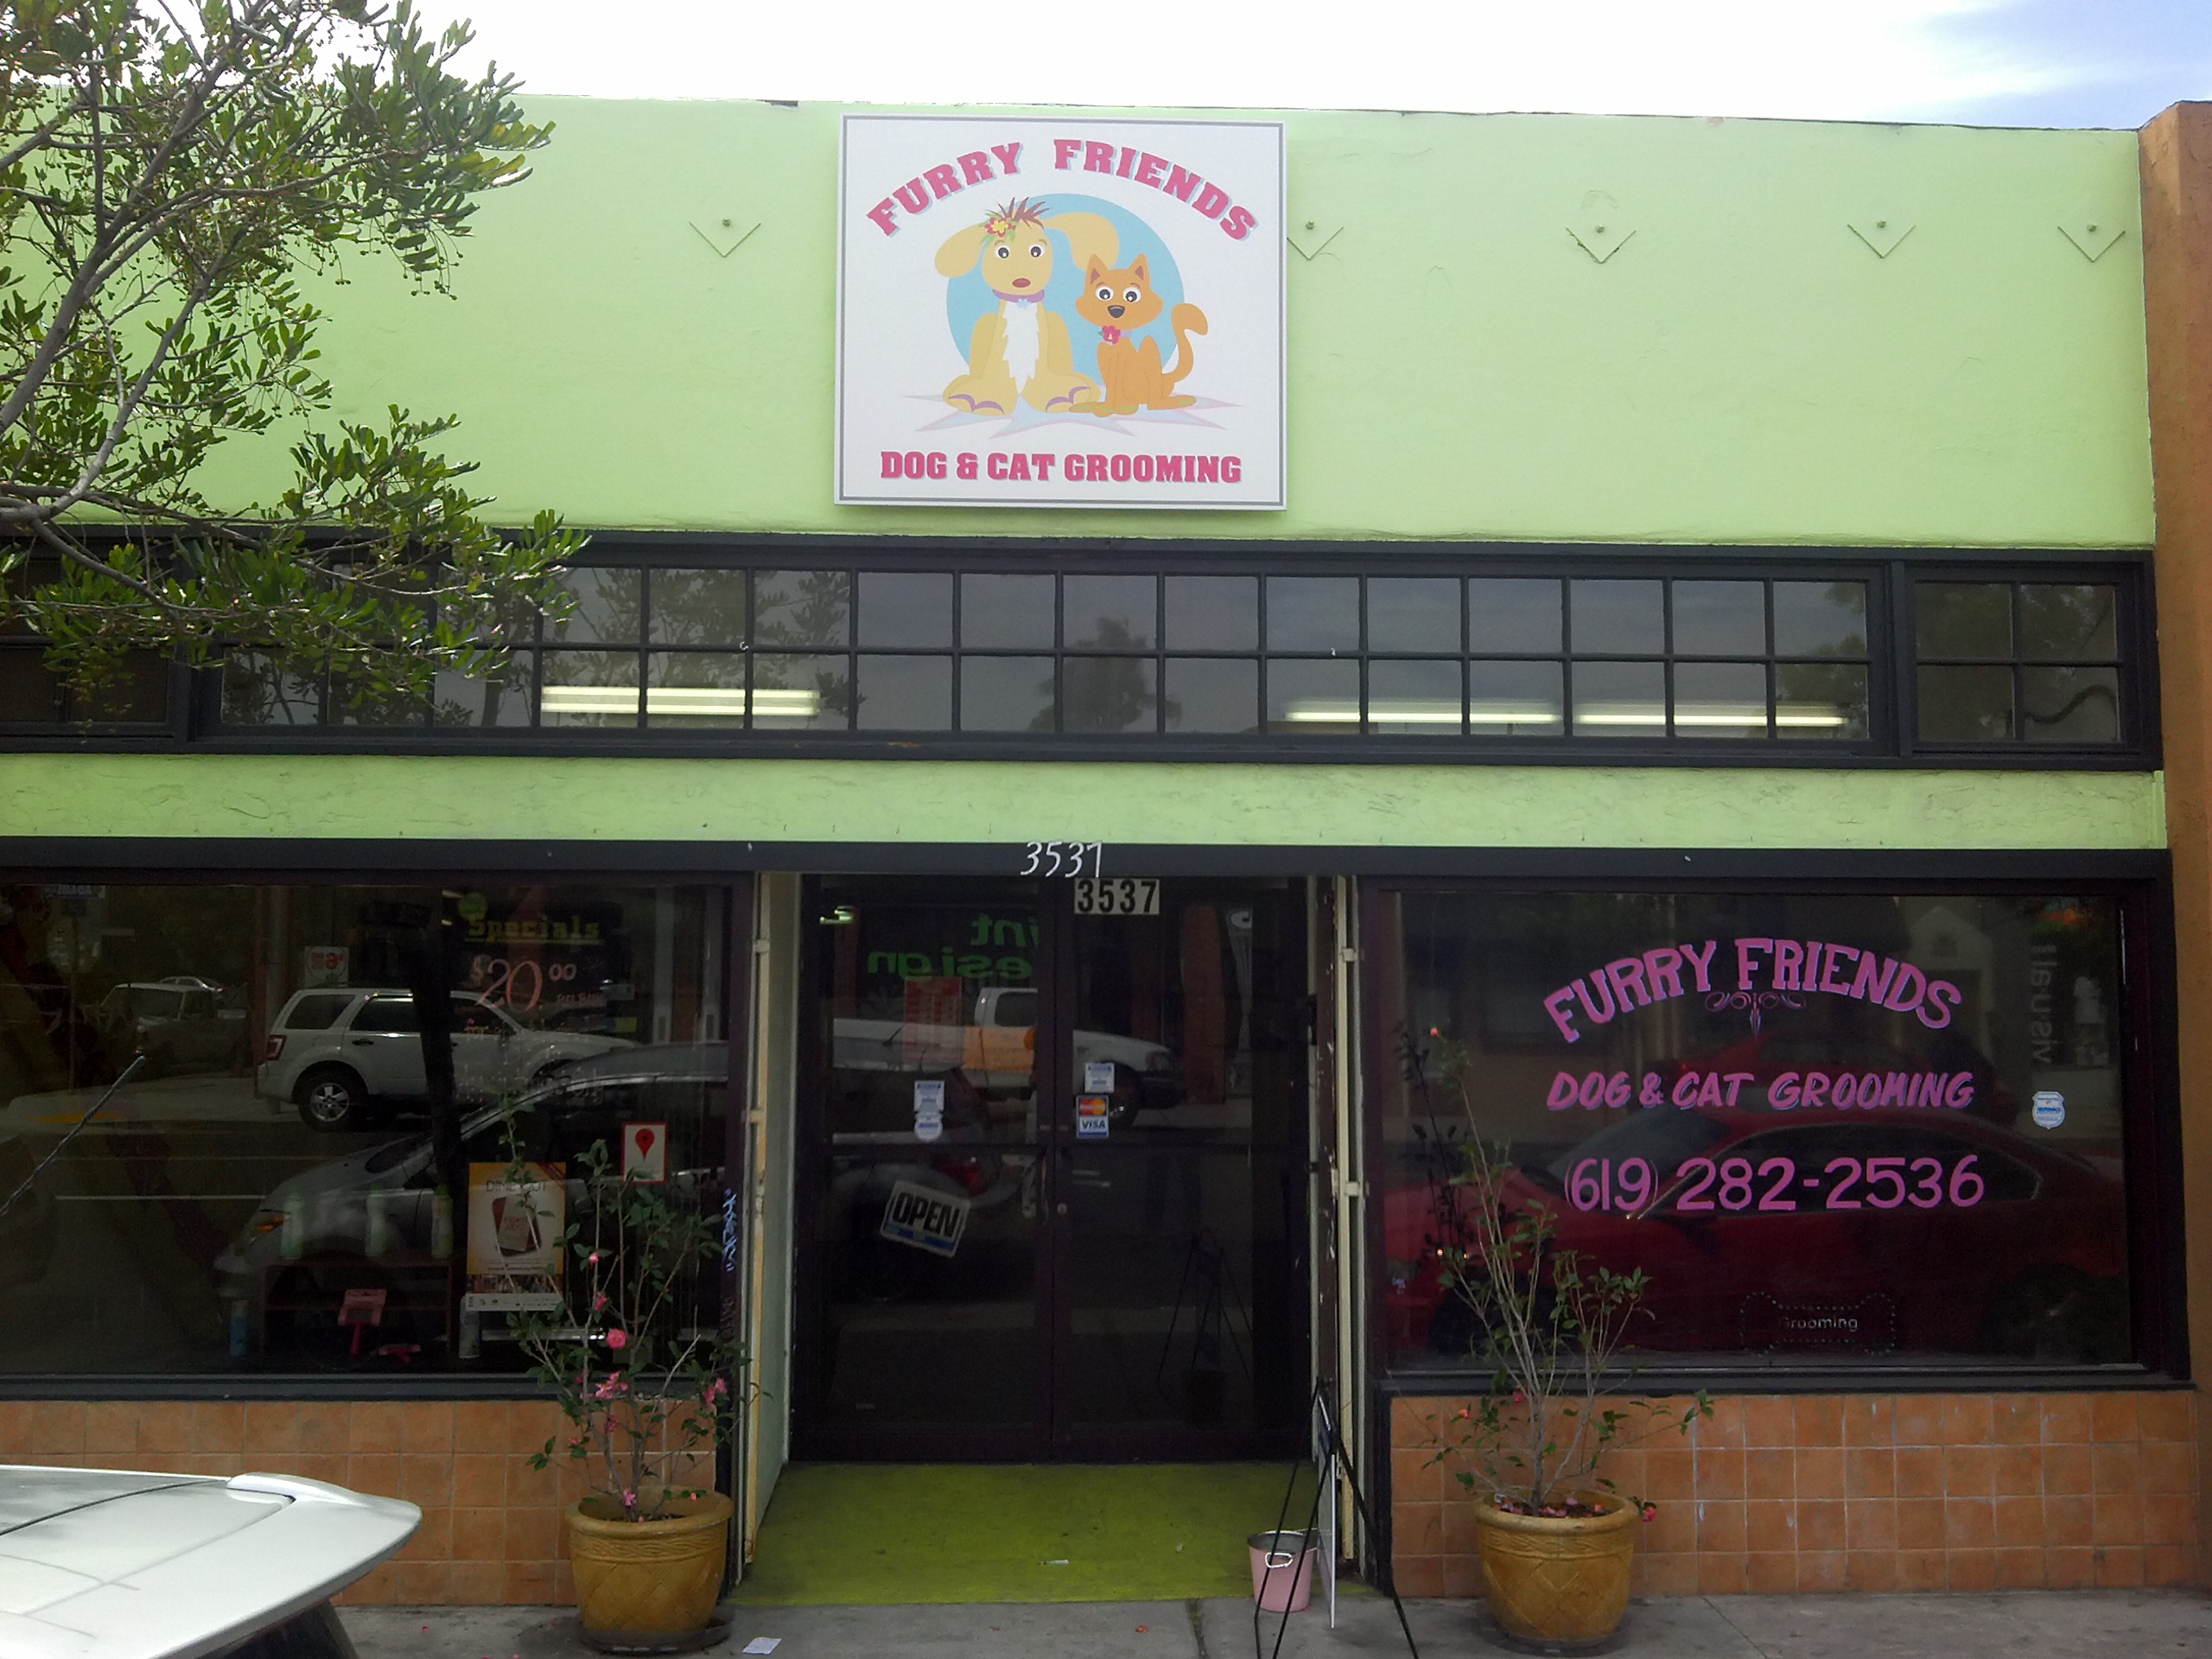 Furry Friends Do and Cat Grooming in North Park Furry Friends Dog and Cat Grooming San Diego (619)282-2536